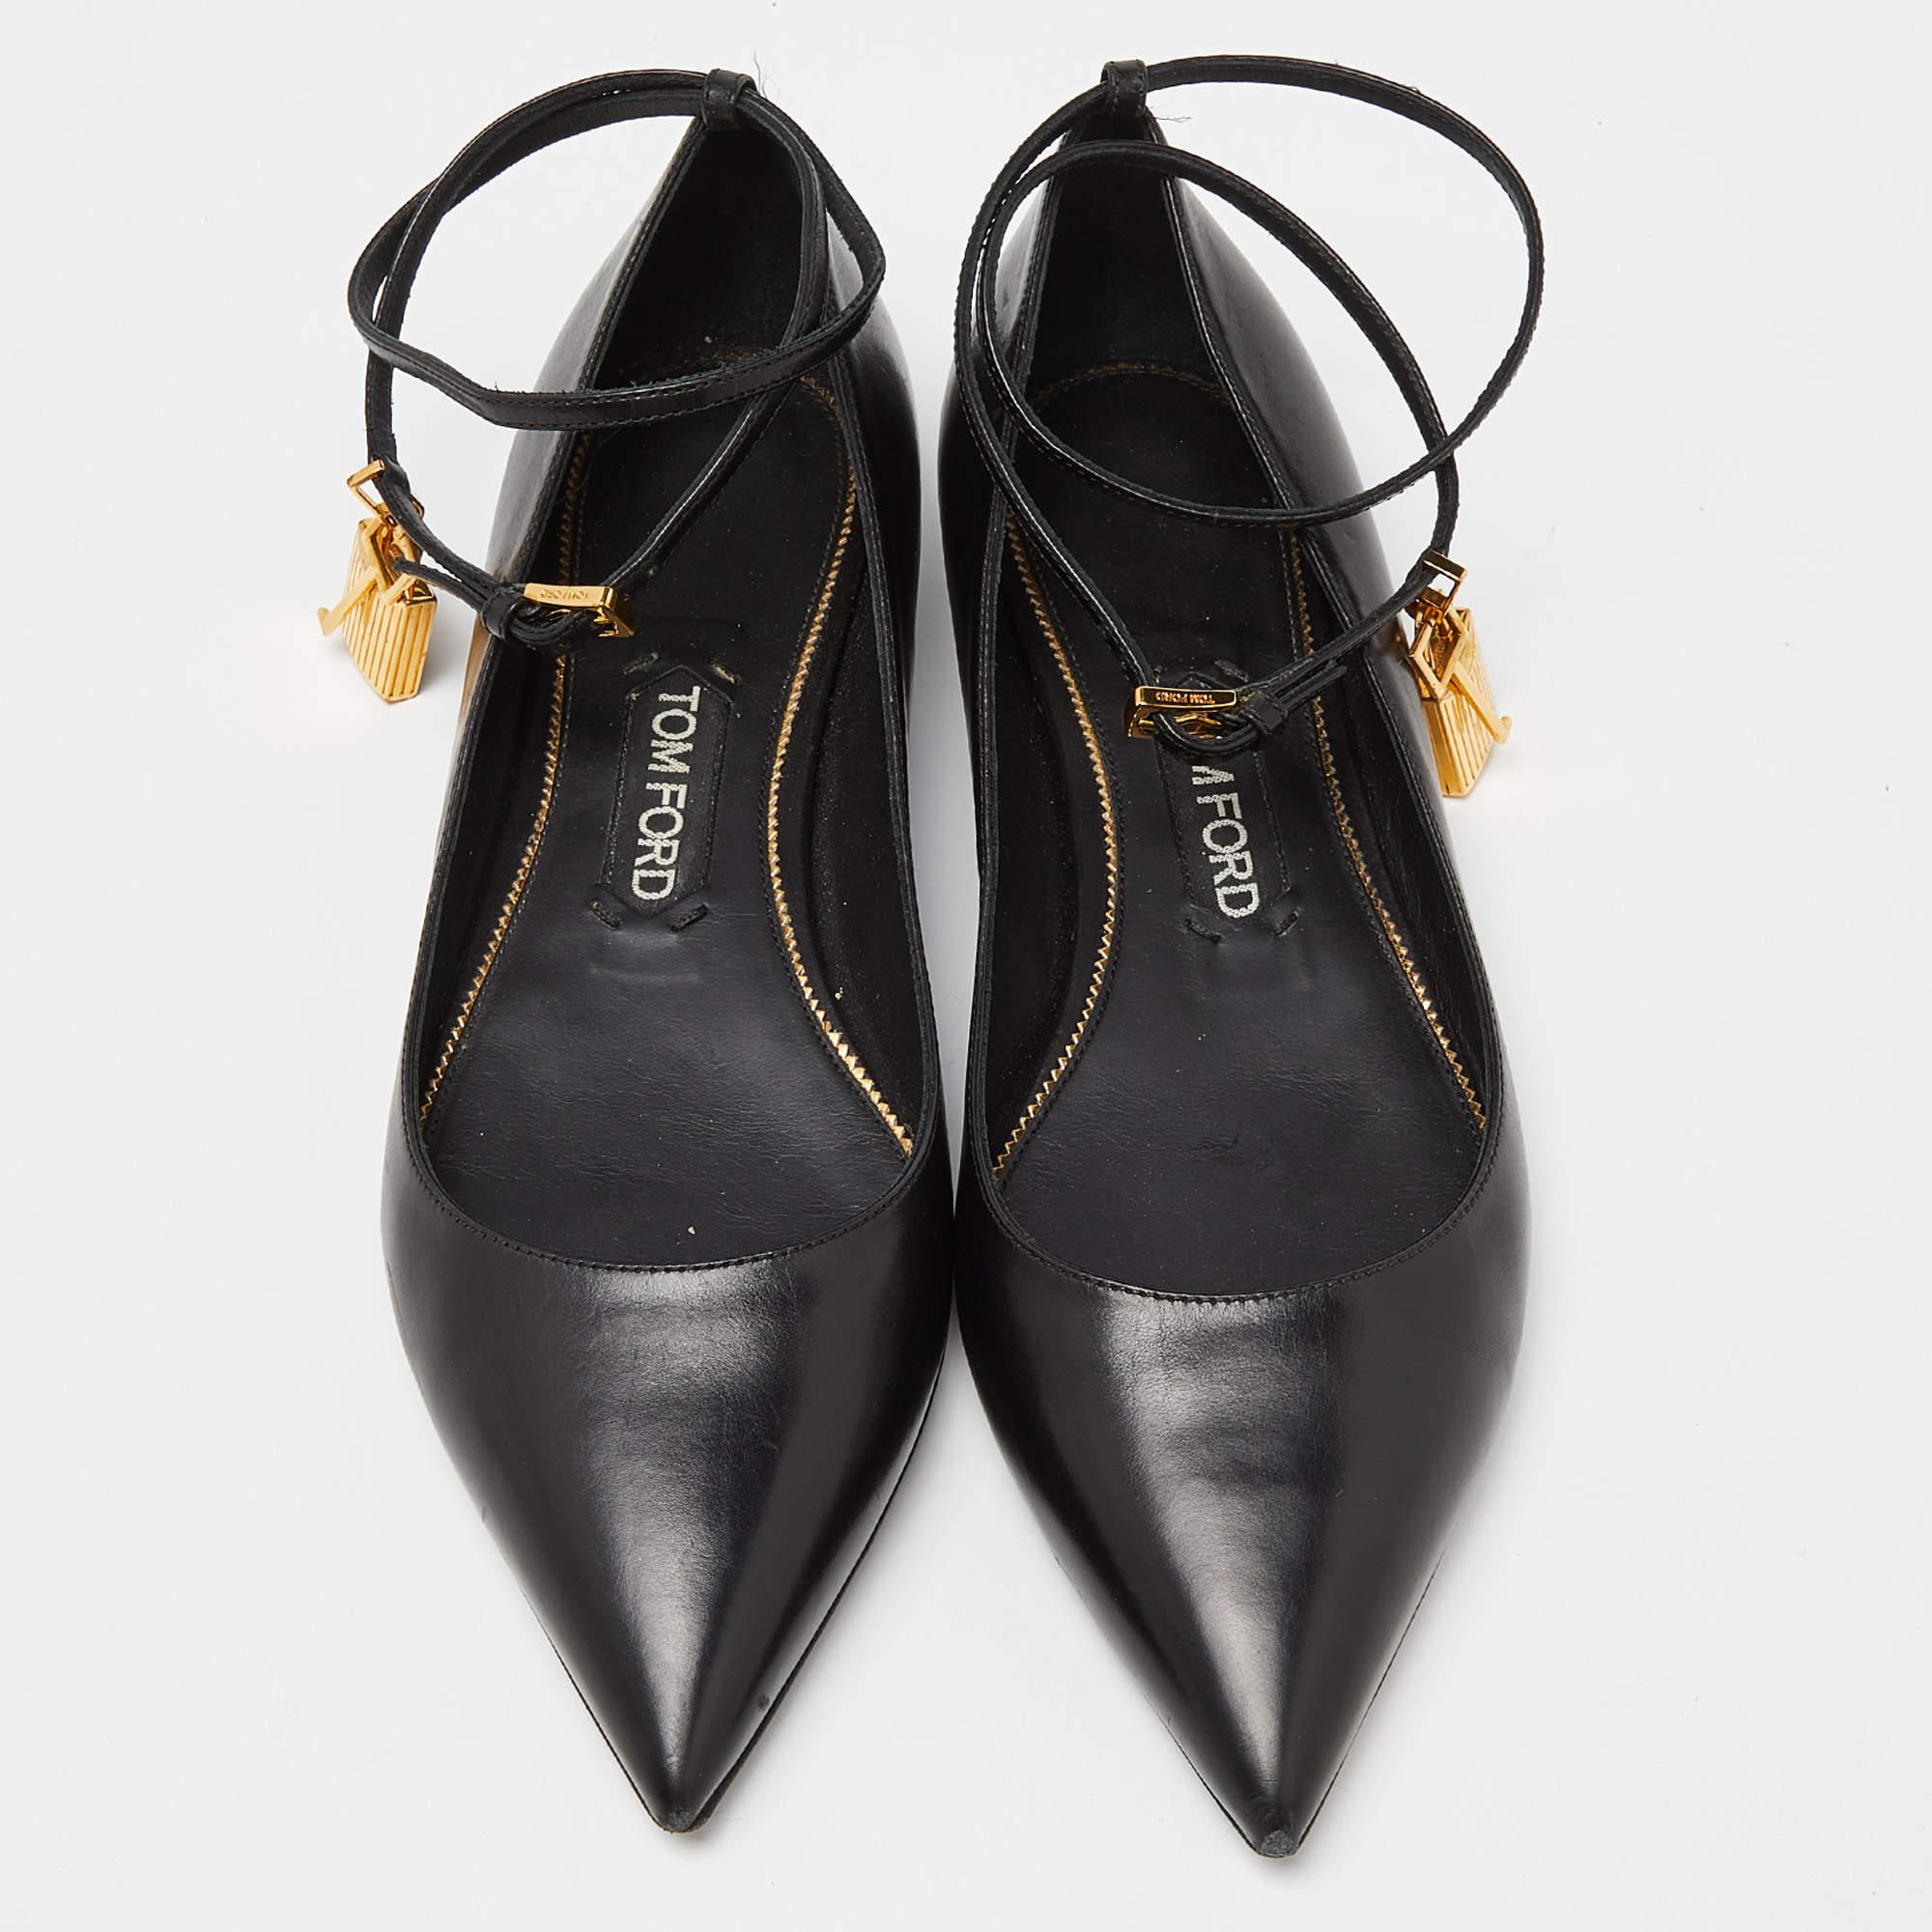 Complete your look by adding these Tom Ford ballet flats to your collection of everyday footwear. They are crafted skilfully to grant the perfect fit and style.

Includes
Original Dustbag, Original Box